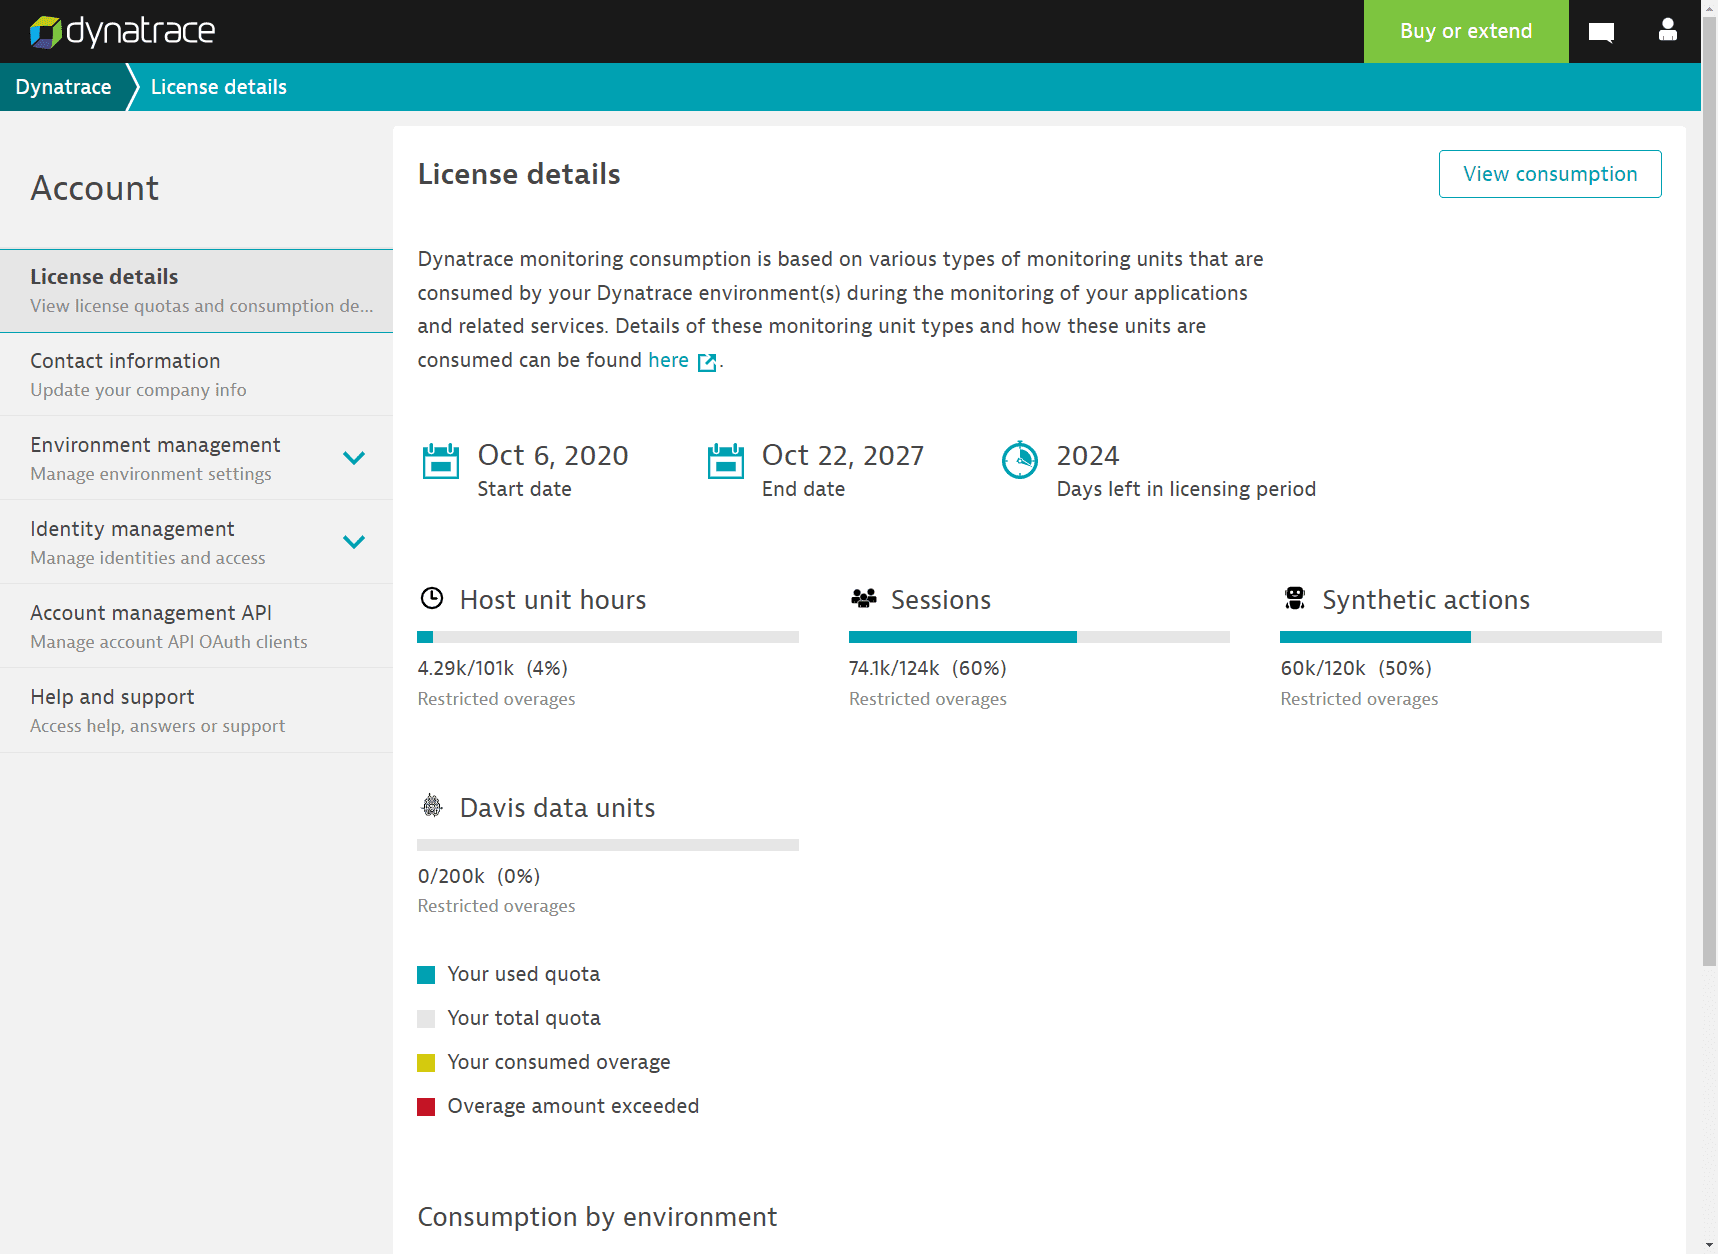 Account settings page with host units allocation